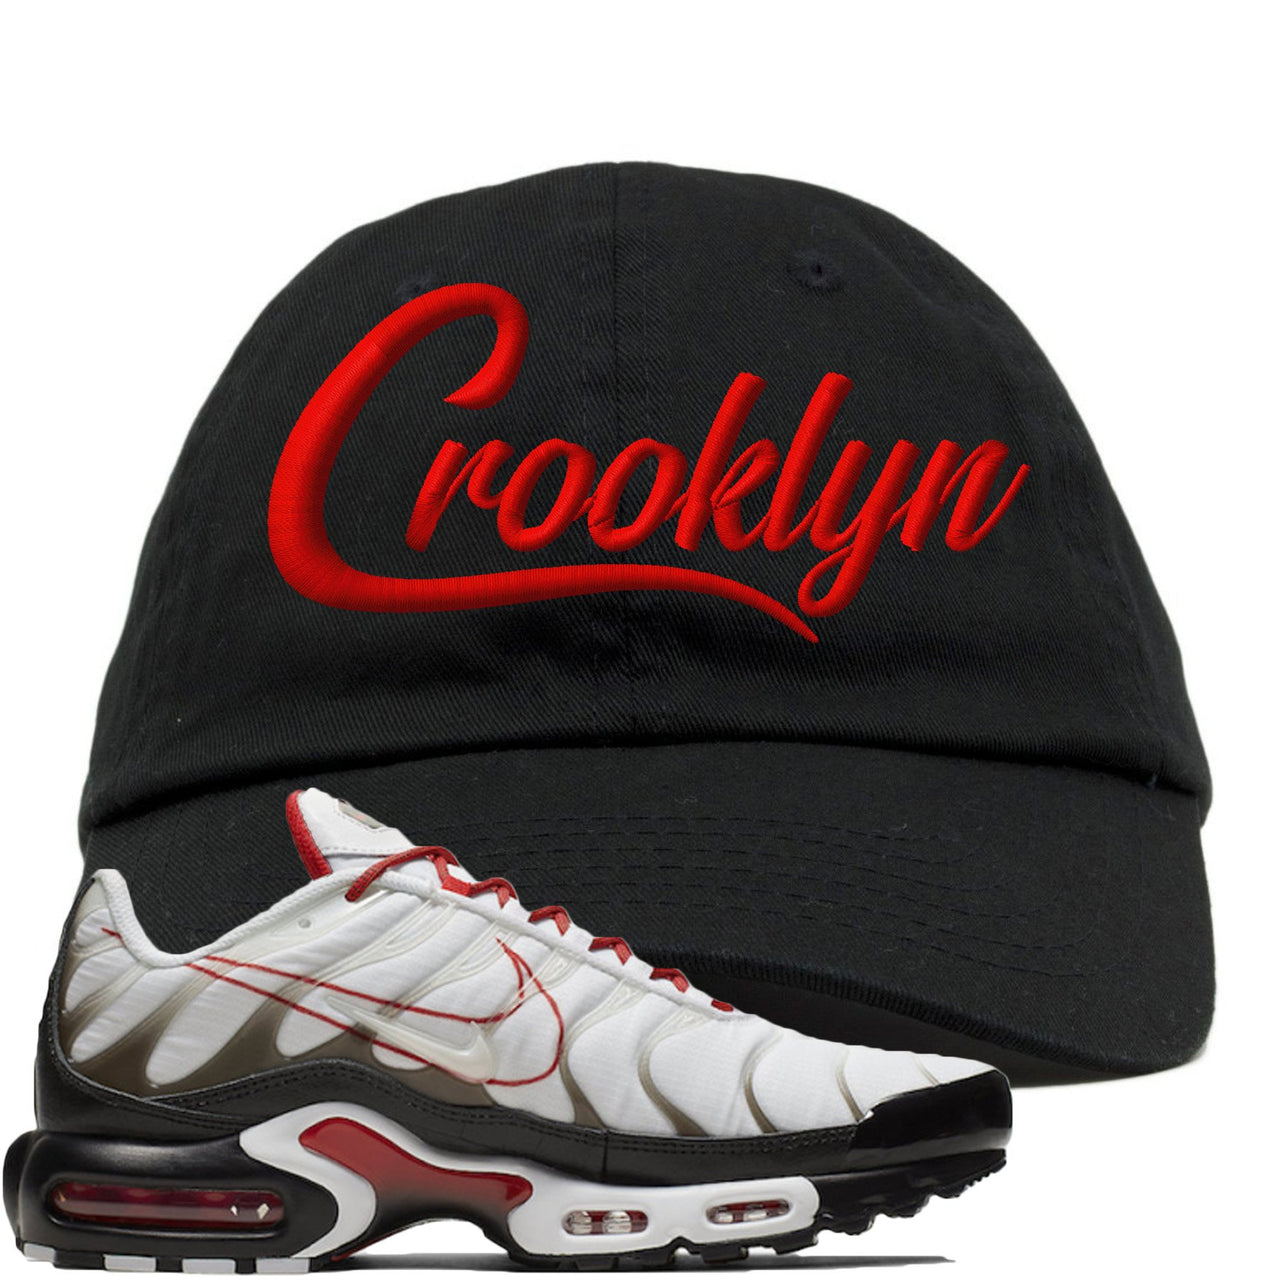 White University Red Pluses Dad Hat | Crooklyn, Black